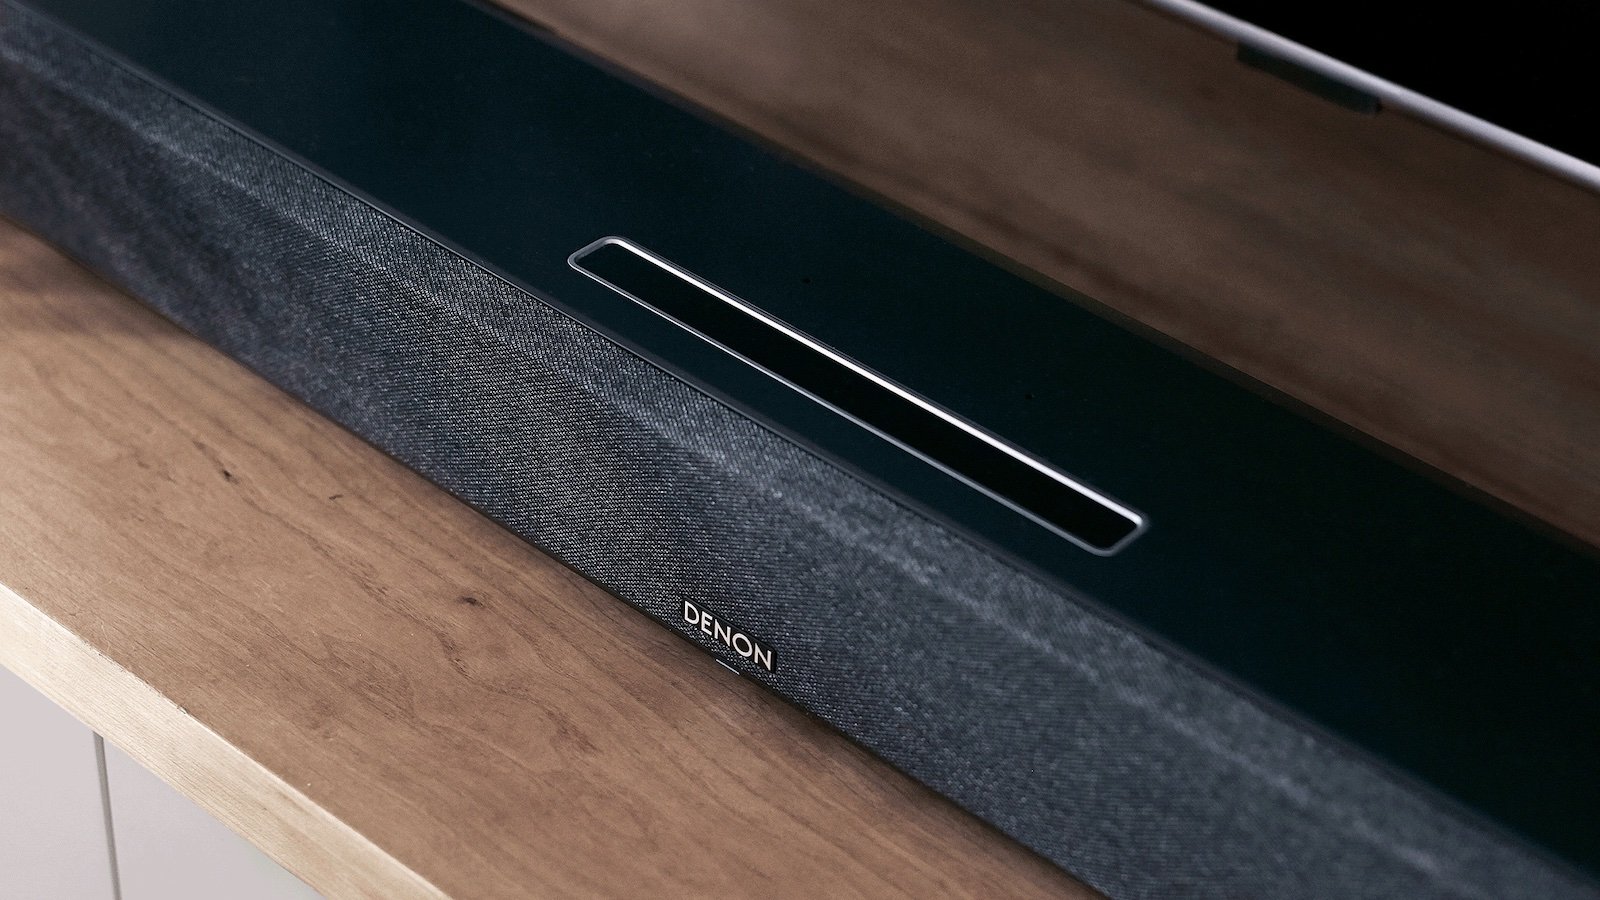 Denon Home Sound Bar 550 delivers Dolby Atmos and DTX:X 3D